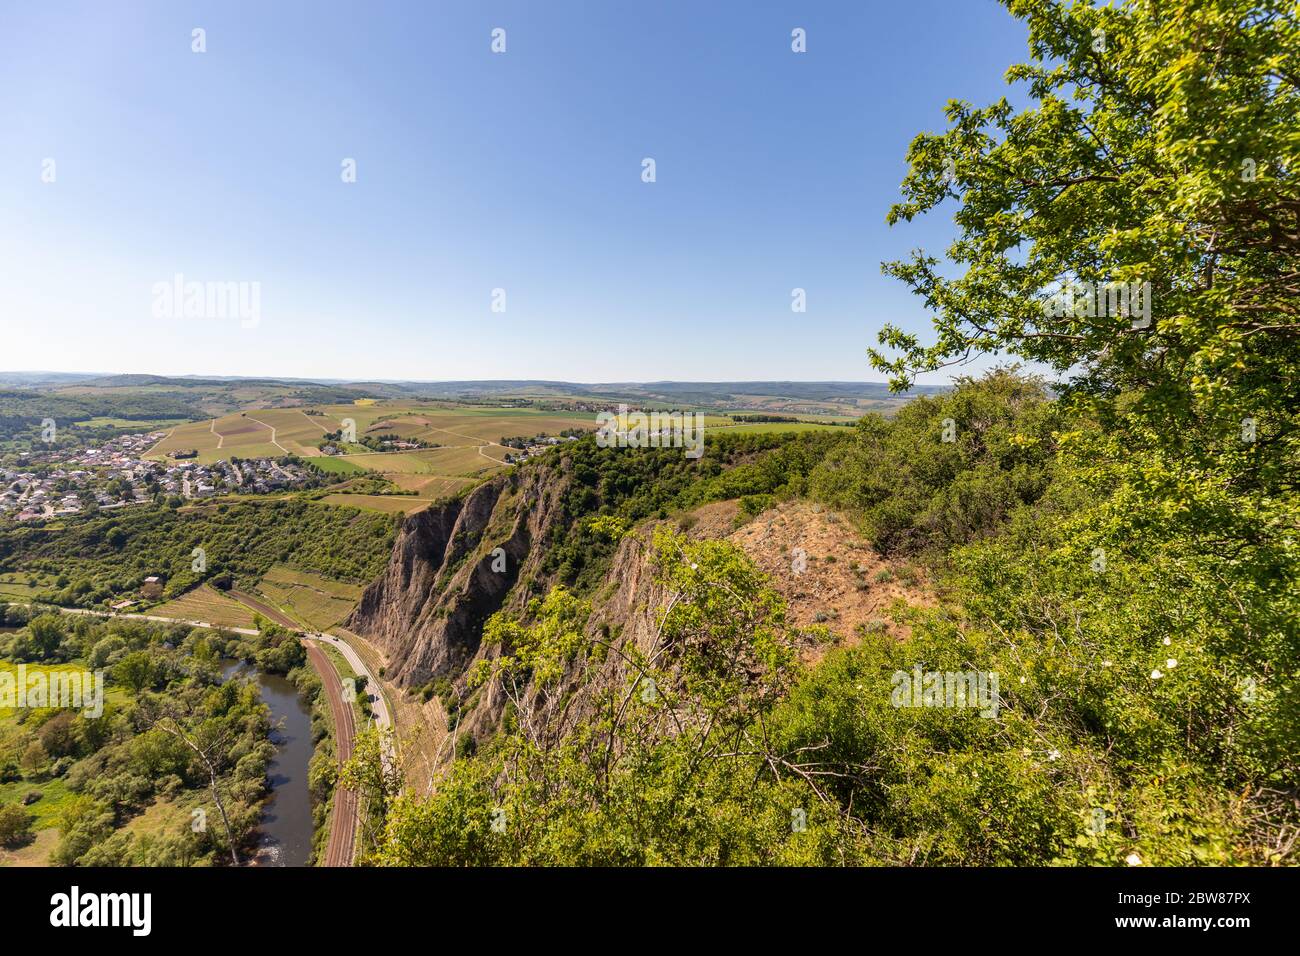 Wide angle view at landscape from Rotenfels, Bad Muenster am Stein, Rhineland Palatinate, Germany Stock Photo